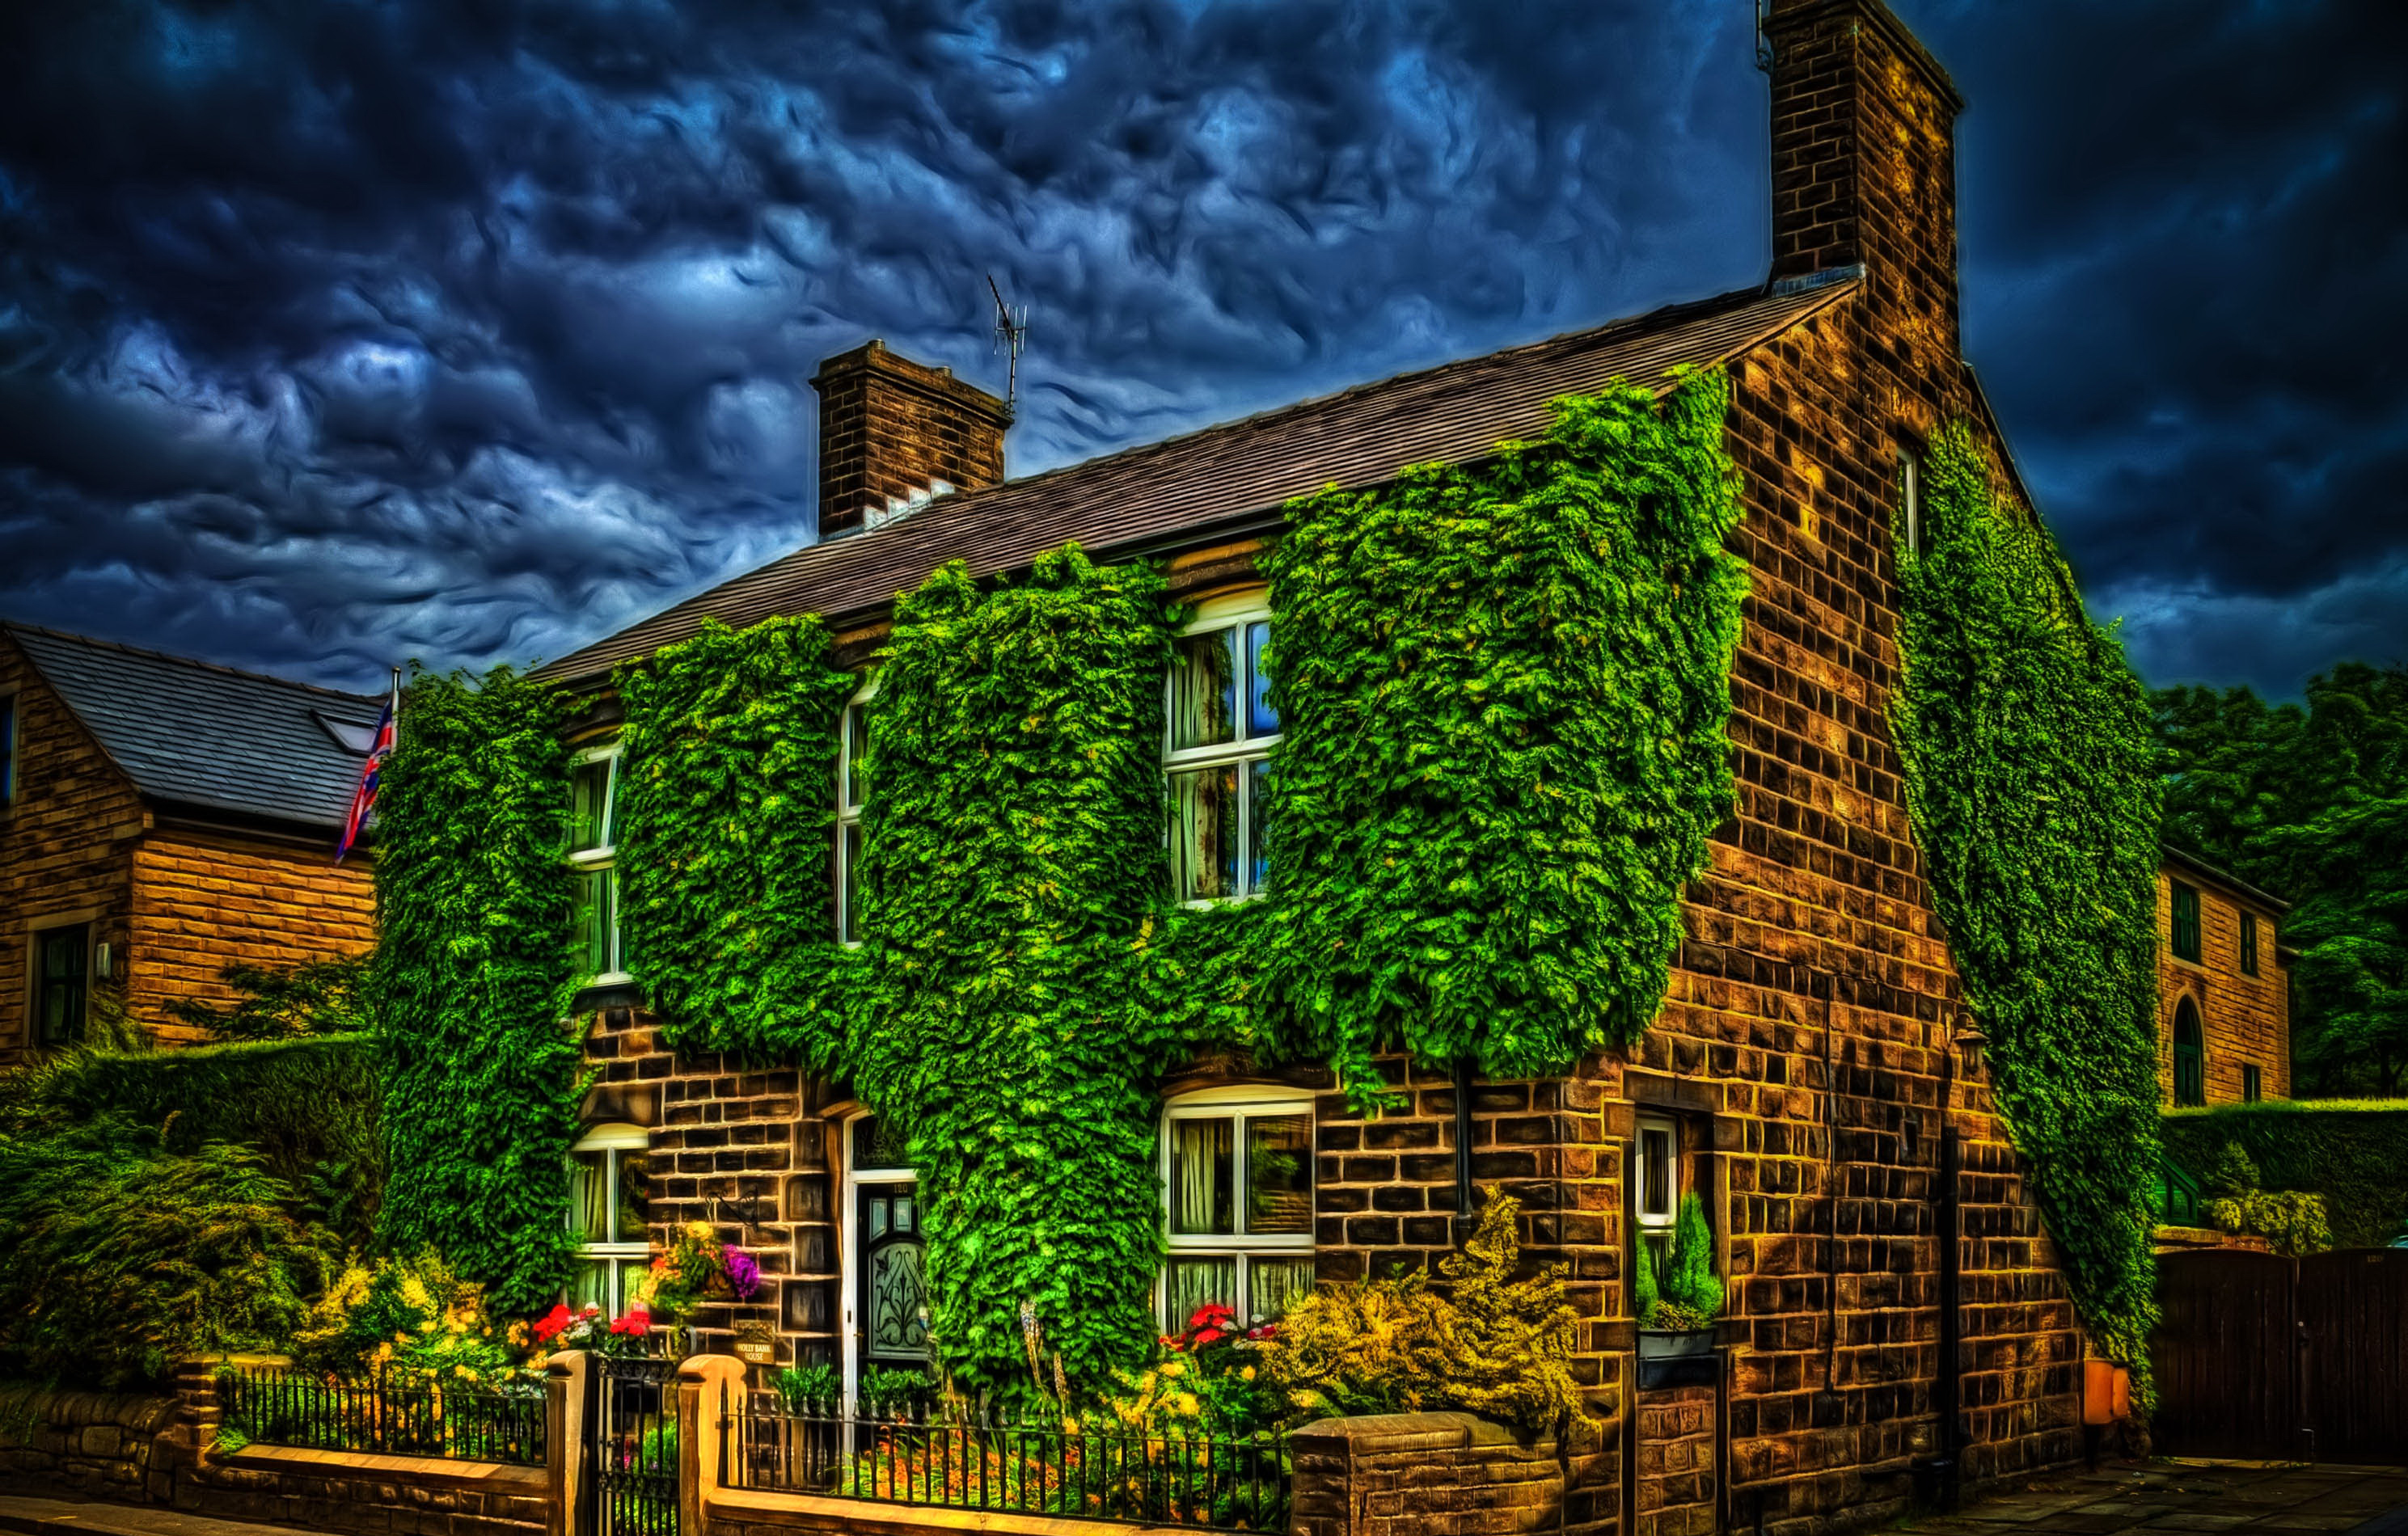 photography, hdr, architecture, brick, england, green, house, leaf, vine